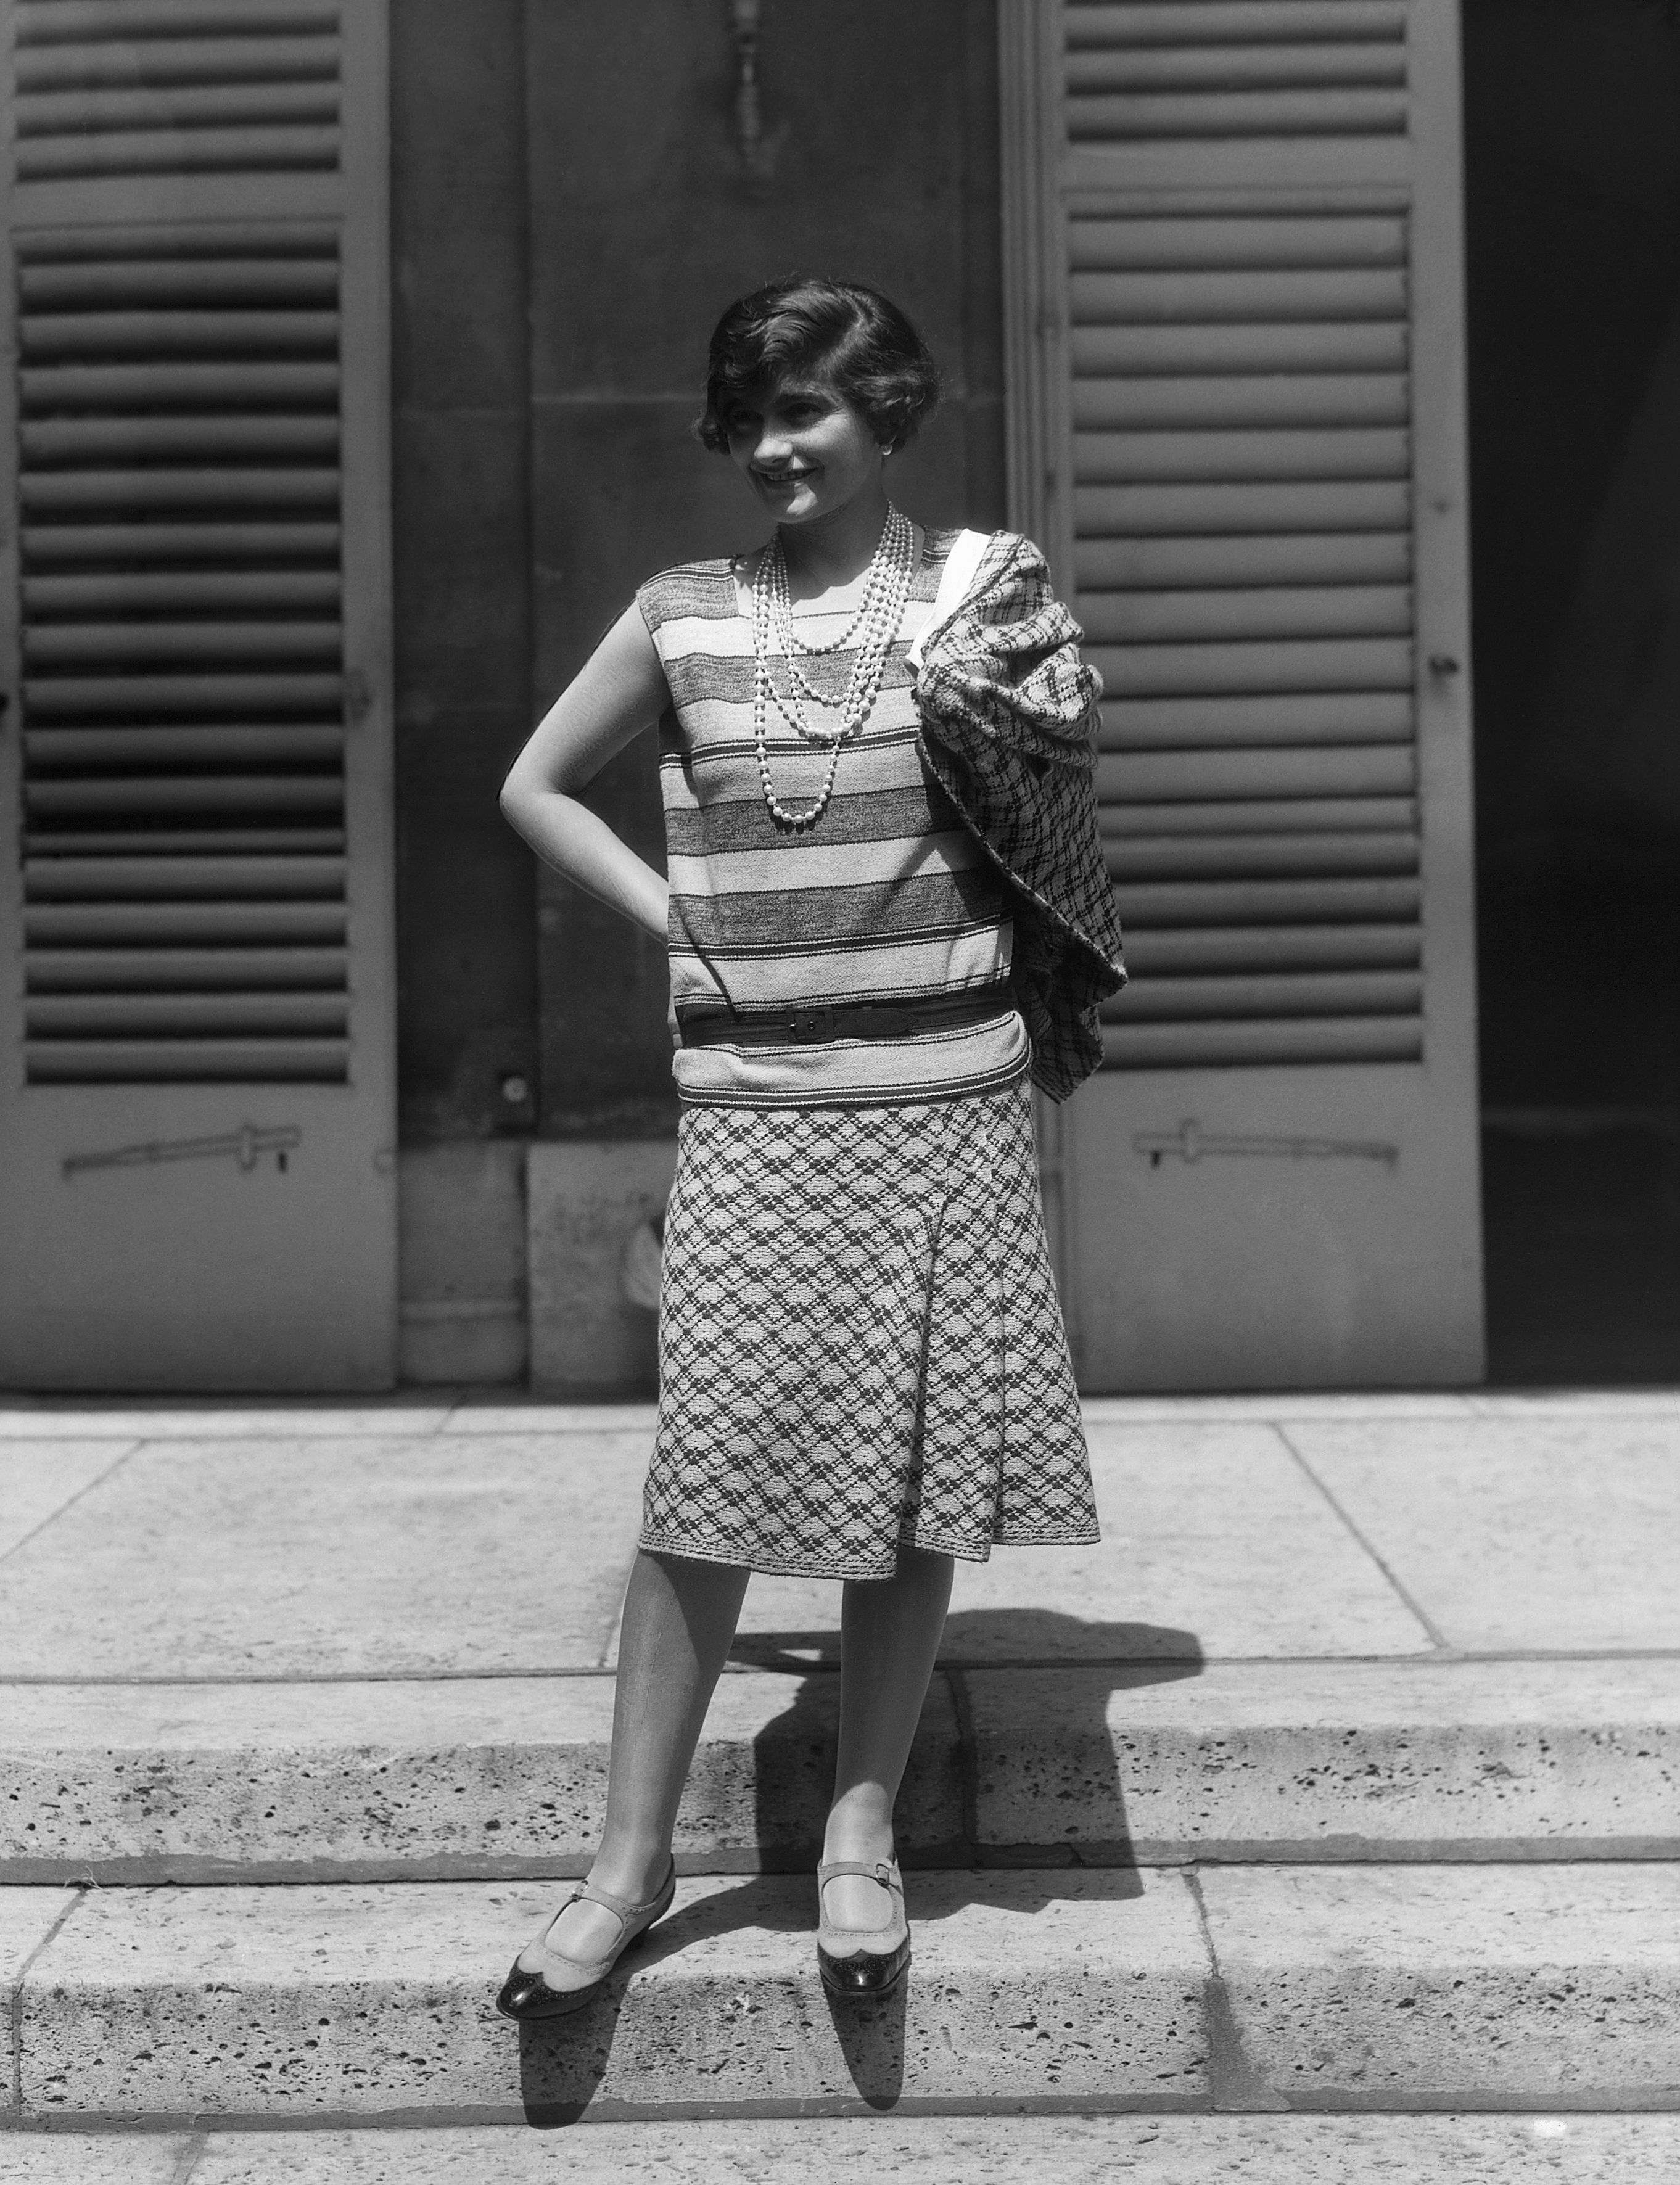 12 things you didn't know about Coco Chanel: a brief history of